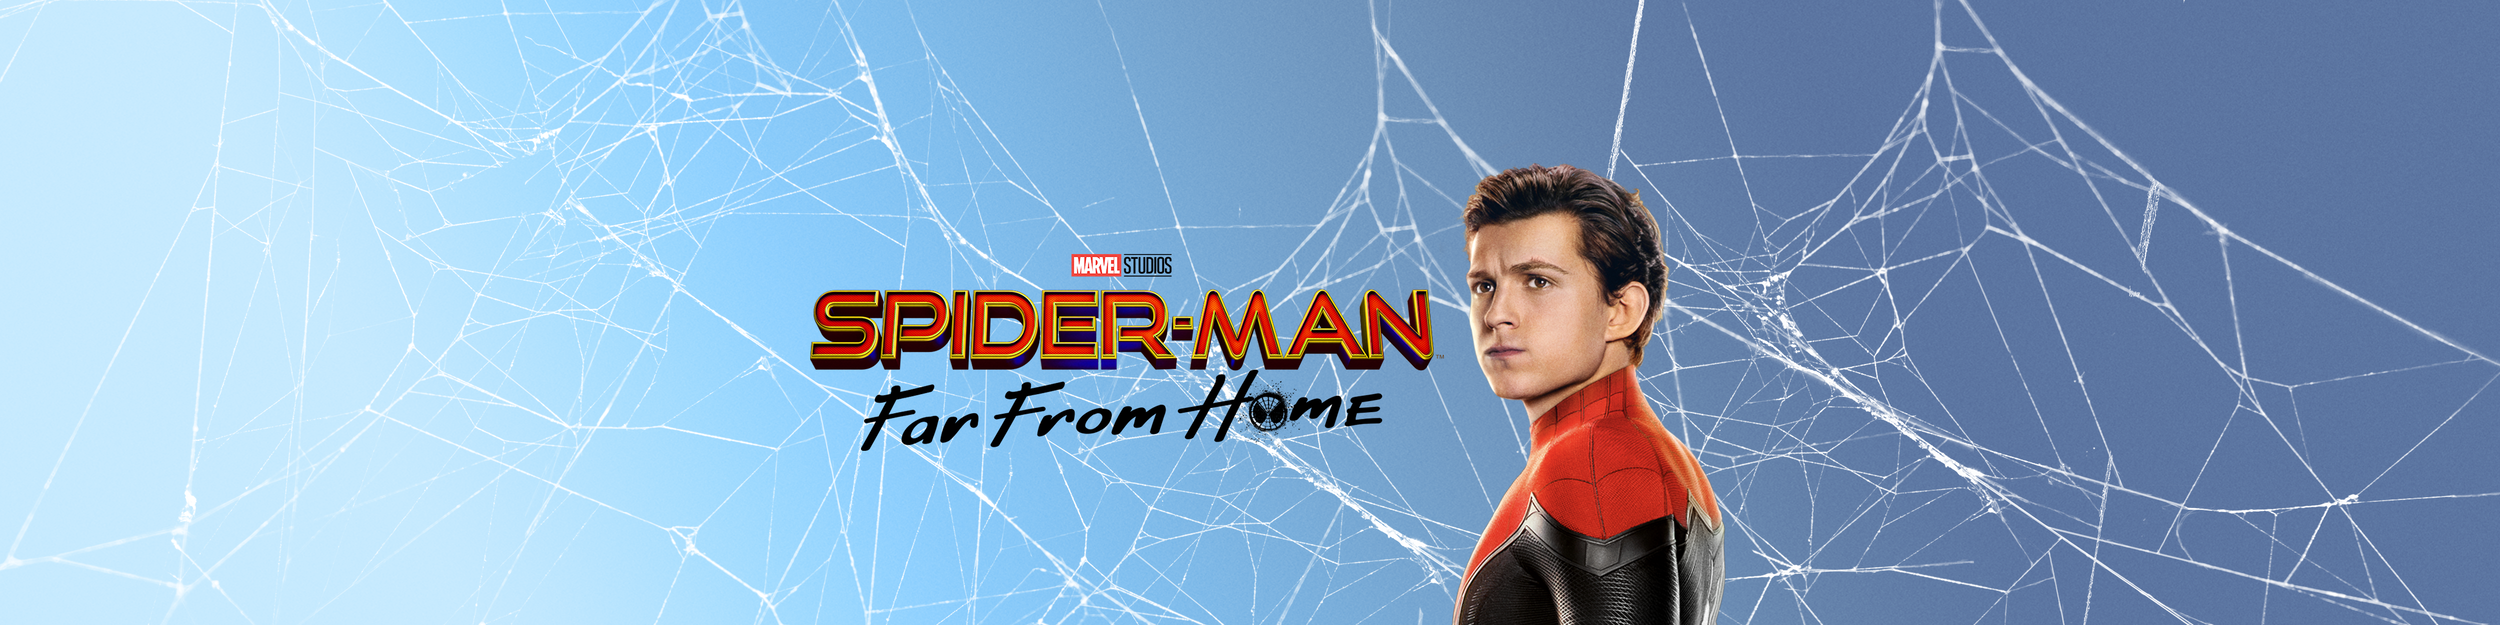 SpidermanFarFromHome_iTunes_4320x1080_BRICK_01.png